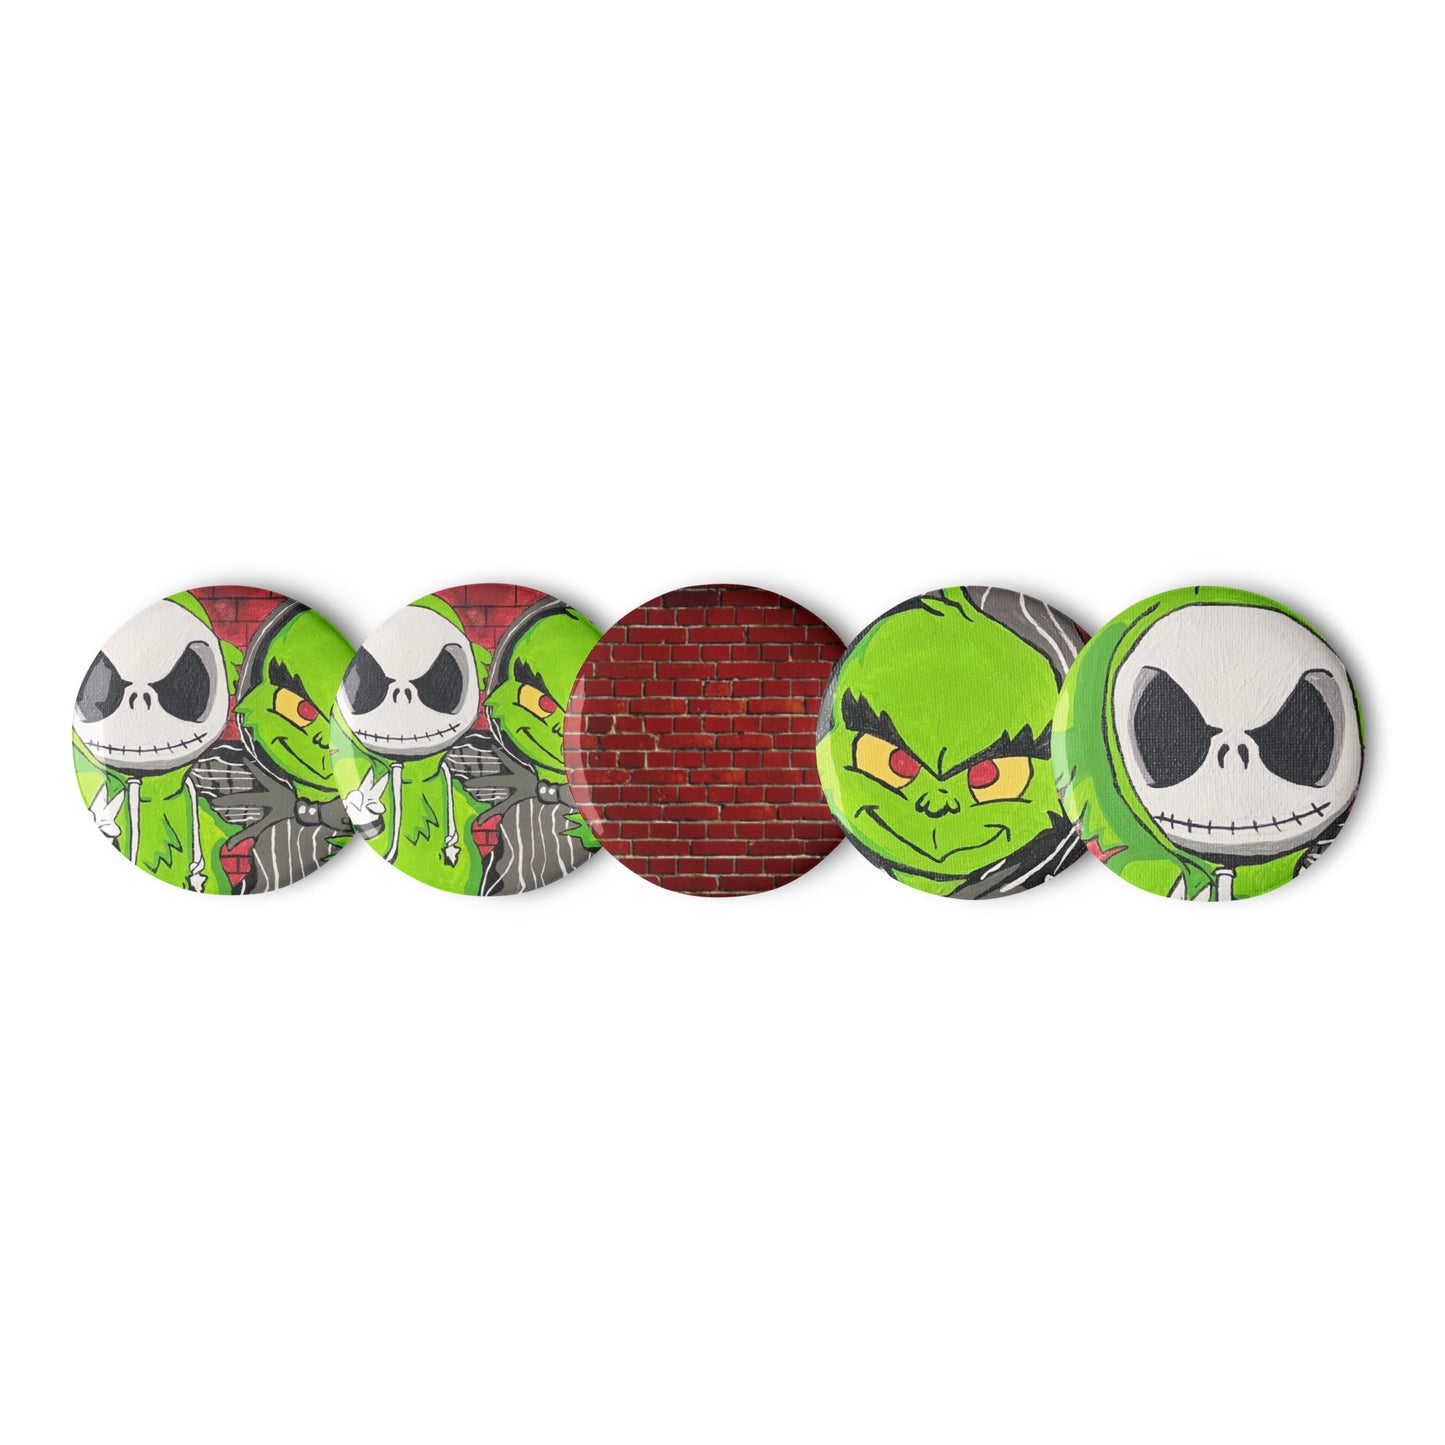 Lil Jack & Lil Grinch Chillen set of pin buttons